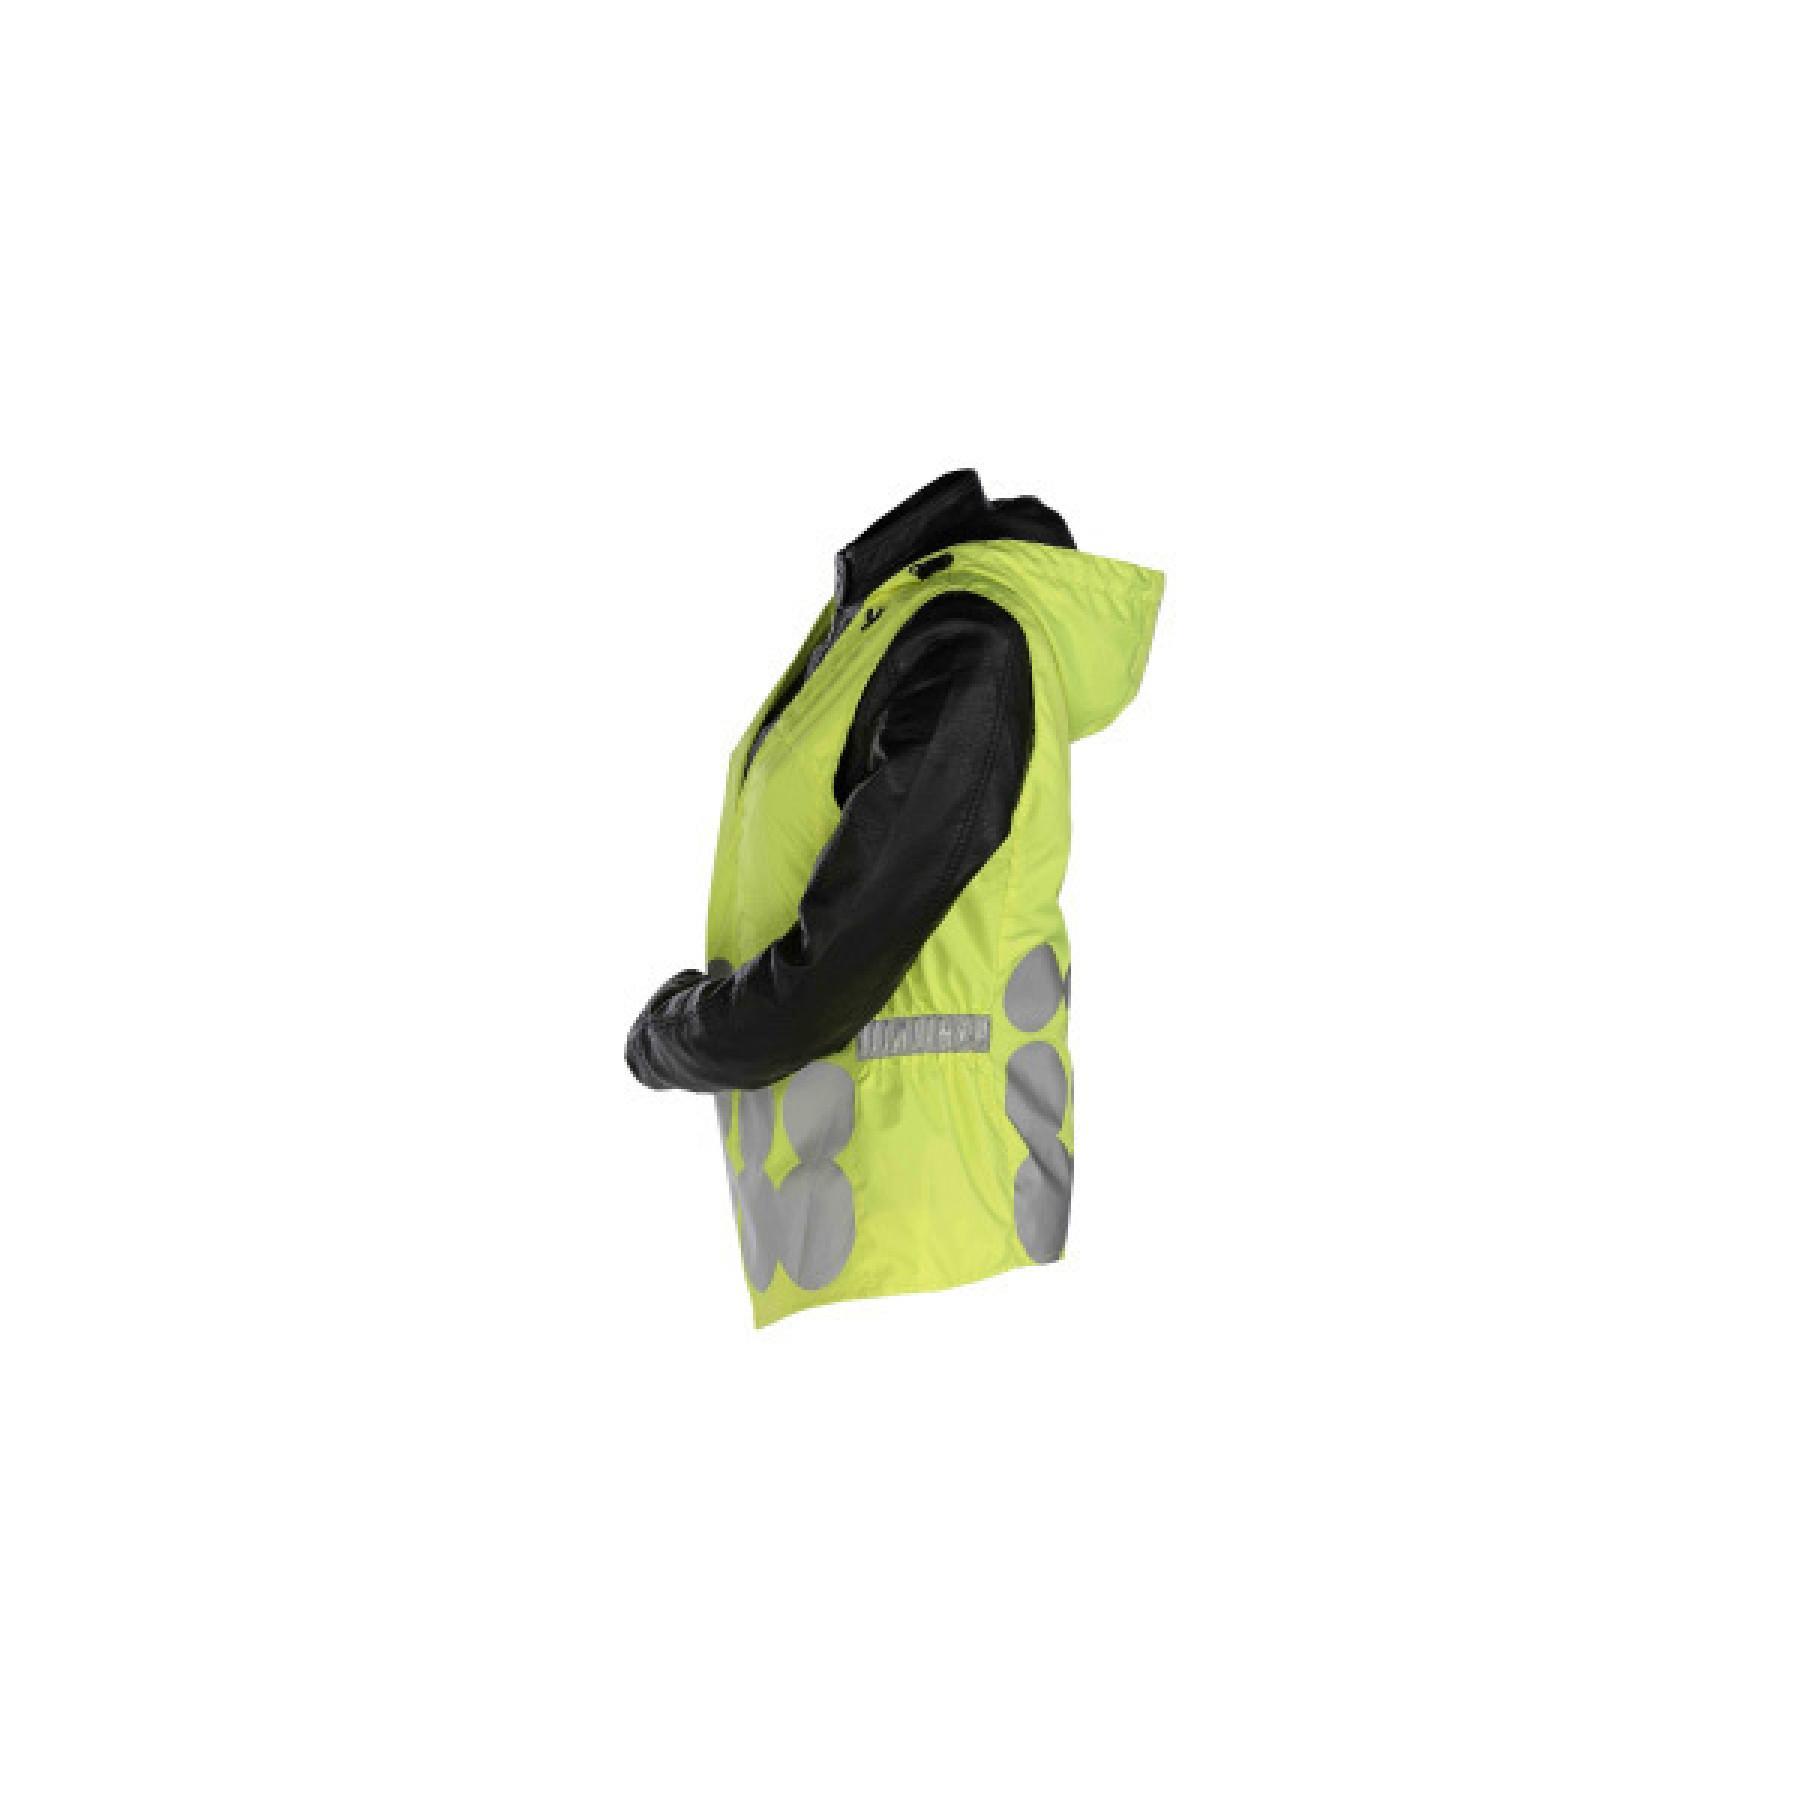 L2S Visioplus Unisex Adults Safety Jacket 